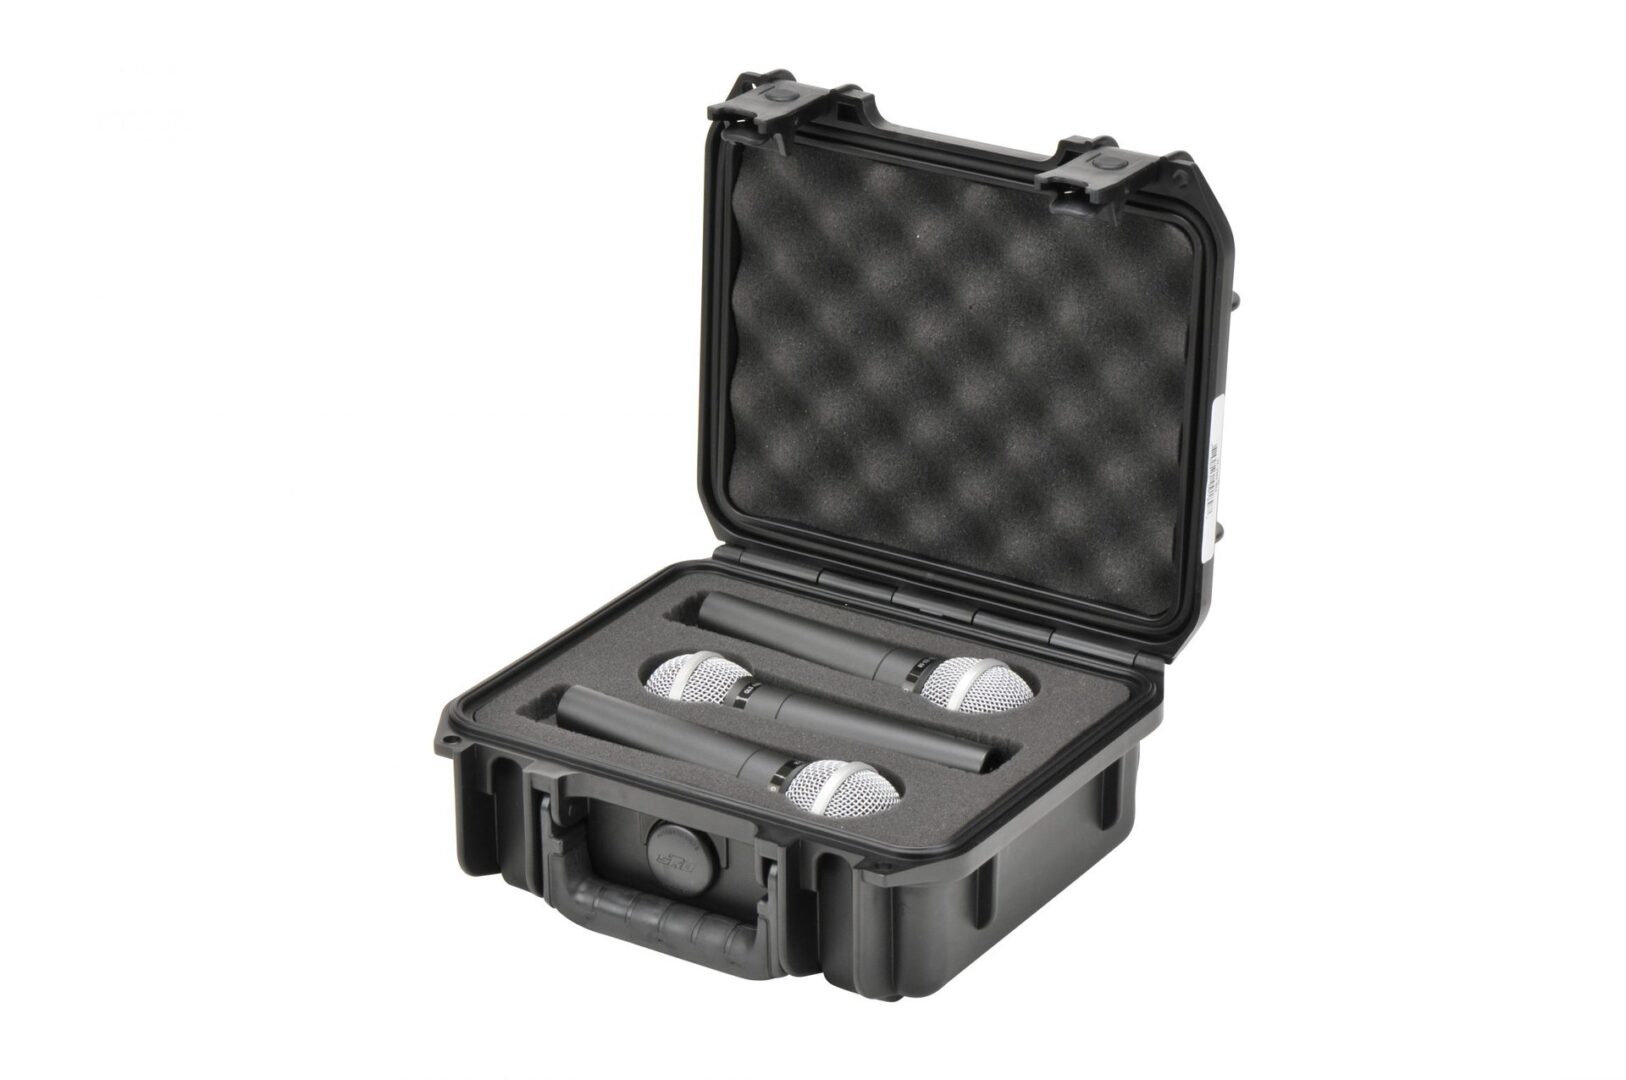 CM Waterproof Mic Case for NEAT Beecase Desktop USB Mic and More